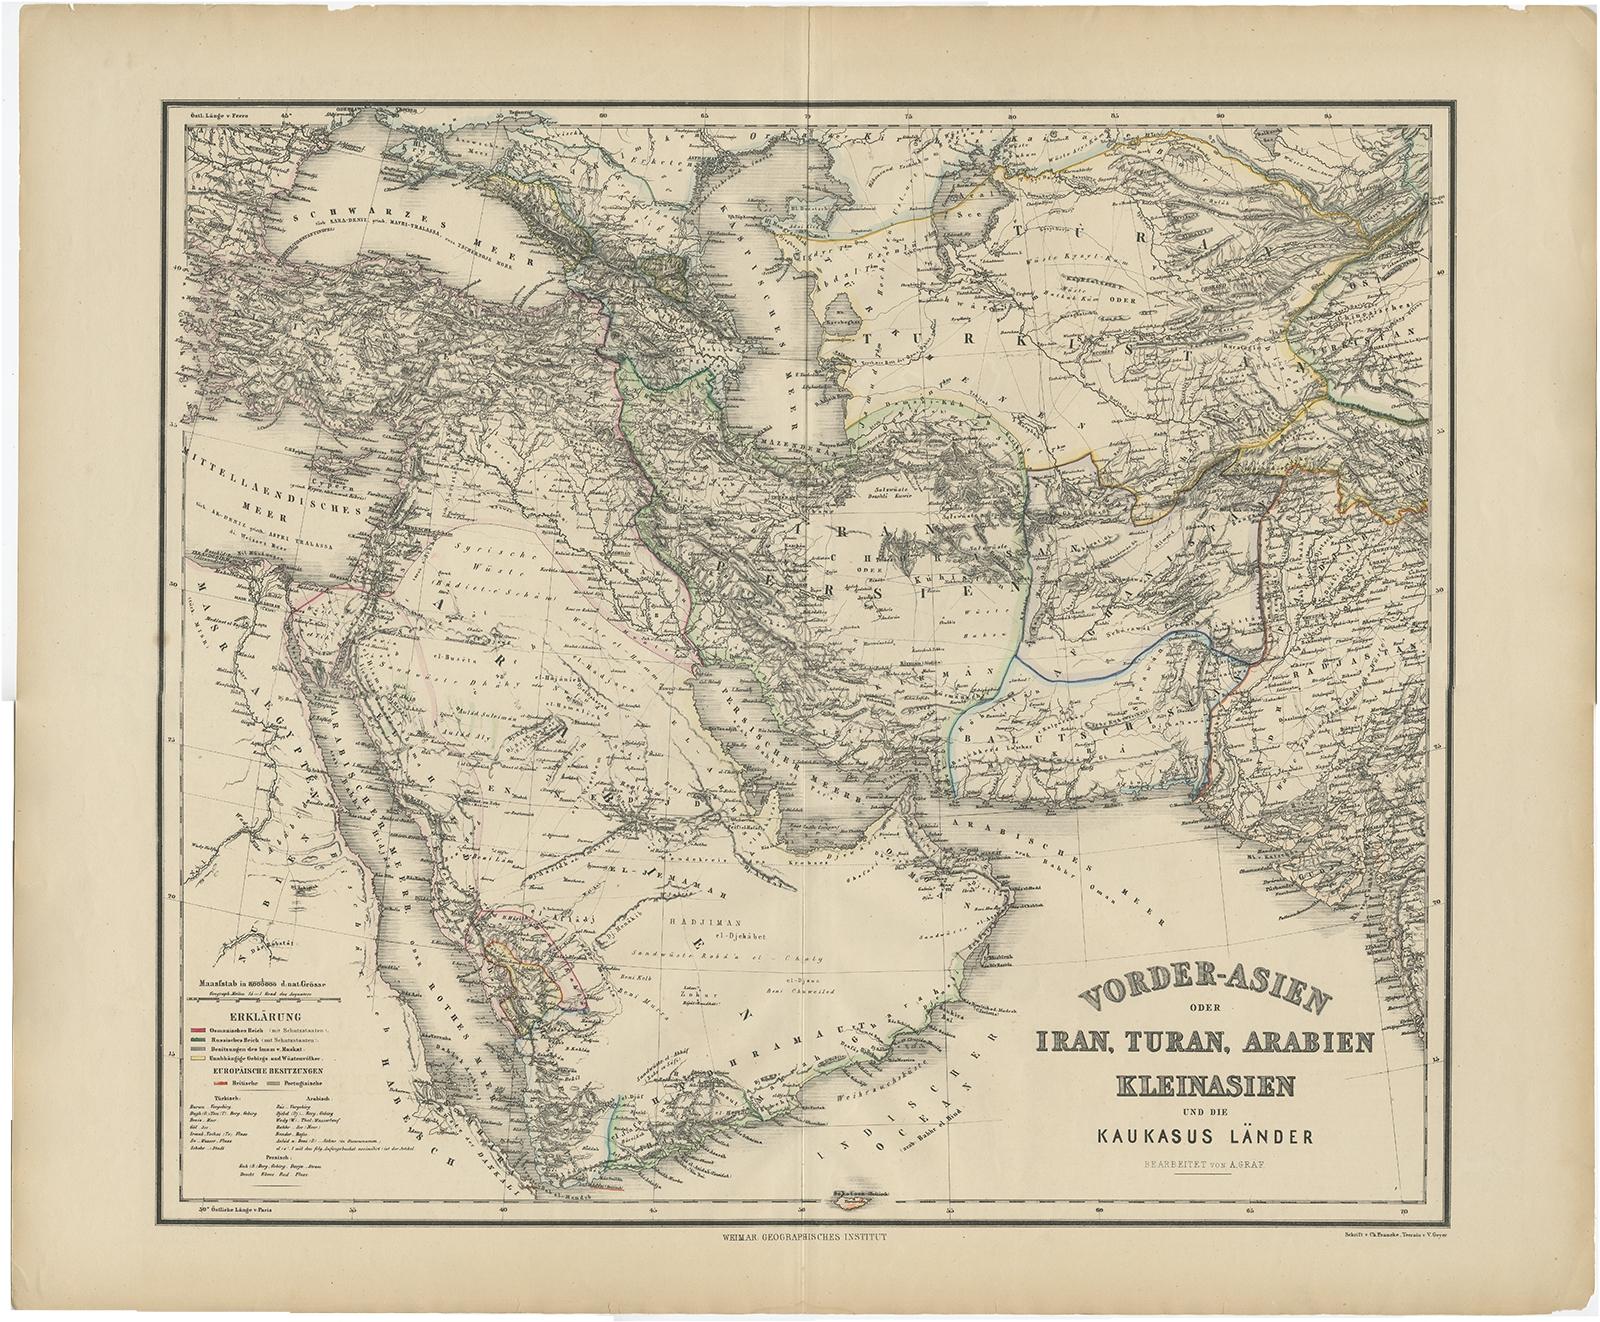 Antique map titled 'Vorder-Asien oder Iran, Turan, Arabien, Kleinasien und die Kaukasus Länder'. Large map centered on Iran. It shows the area from Turkey to Mumbai in India. Includes Arabia, the Caspian Sea and the Aral Lake. Artists and Engravers: